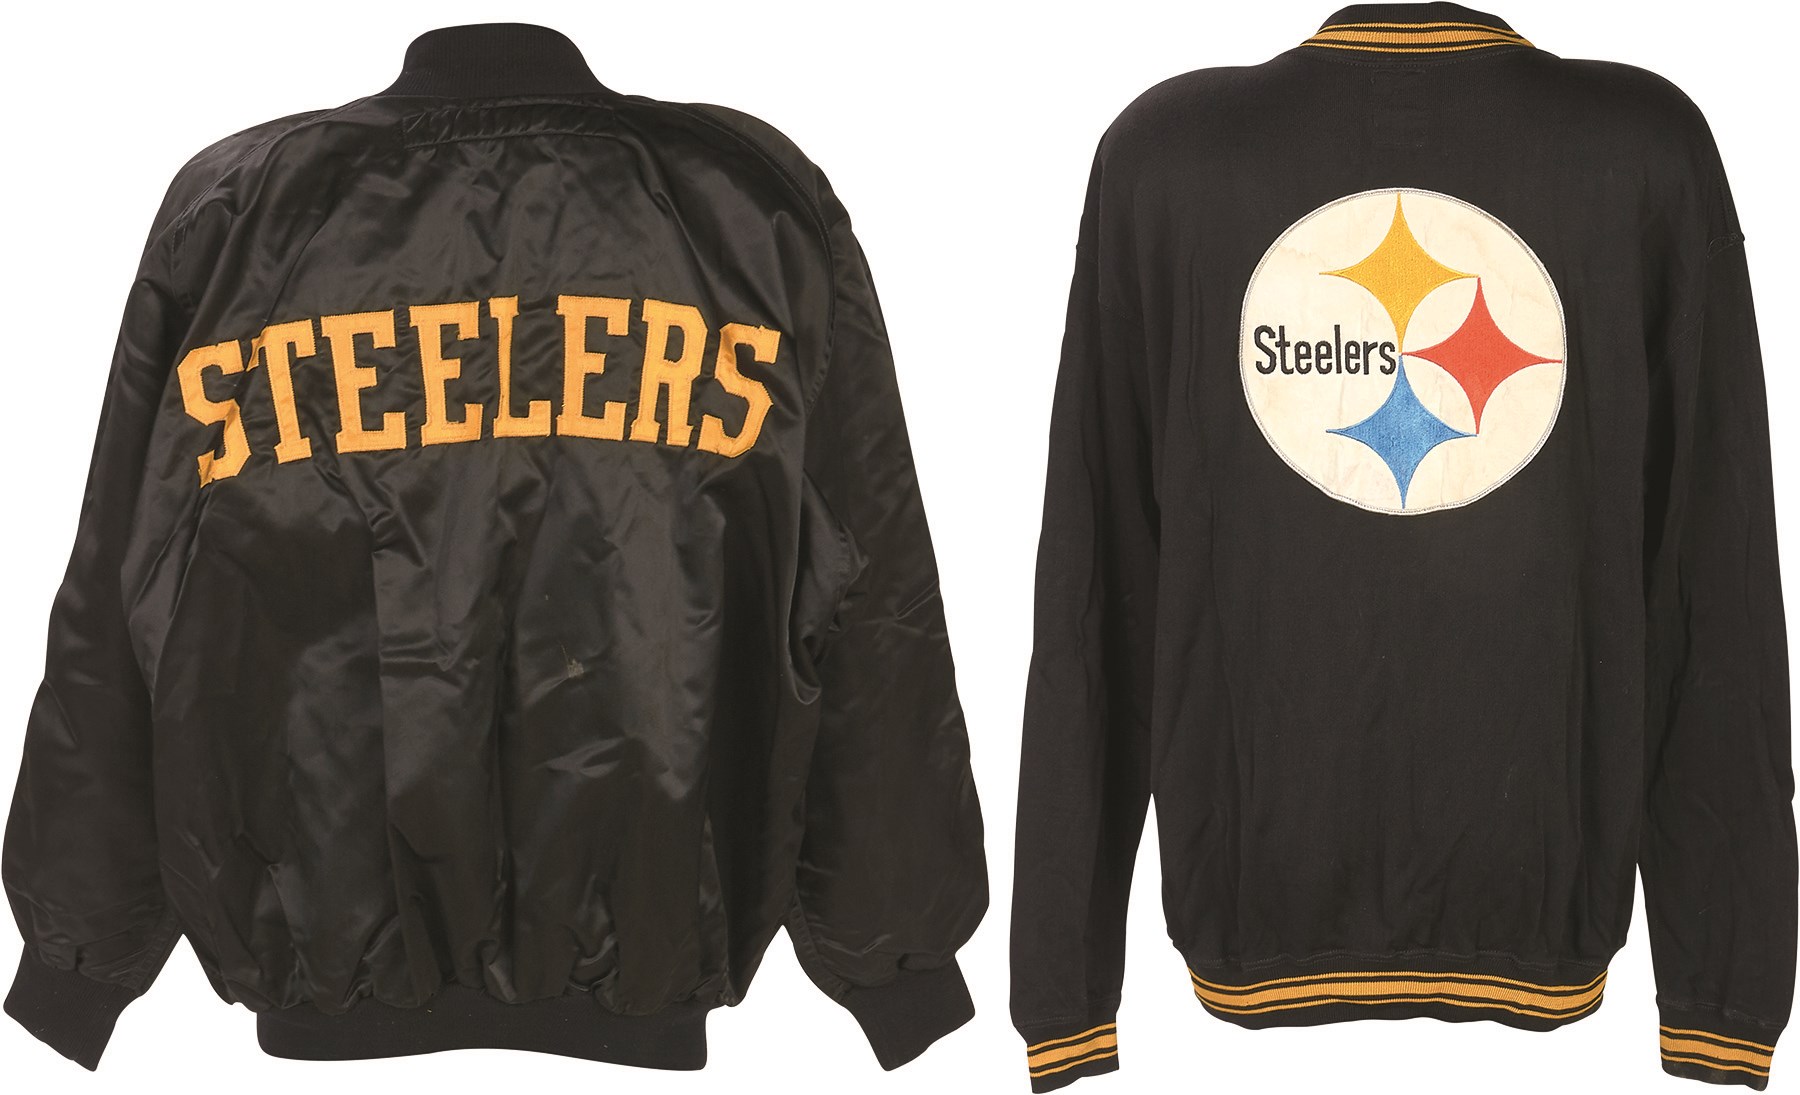 The Pittsburgh Steelers Game Worn Jersey Archive - Two Vintage Pittsburgh Steelers Sideline Jackets (Rawlings & MacGregor)